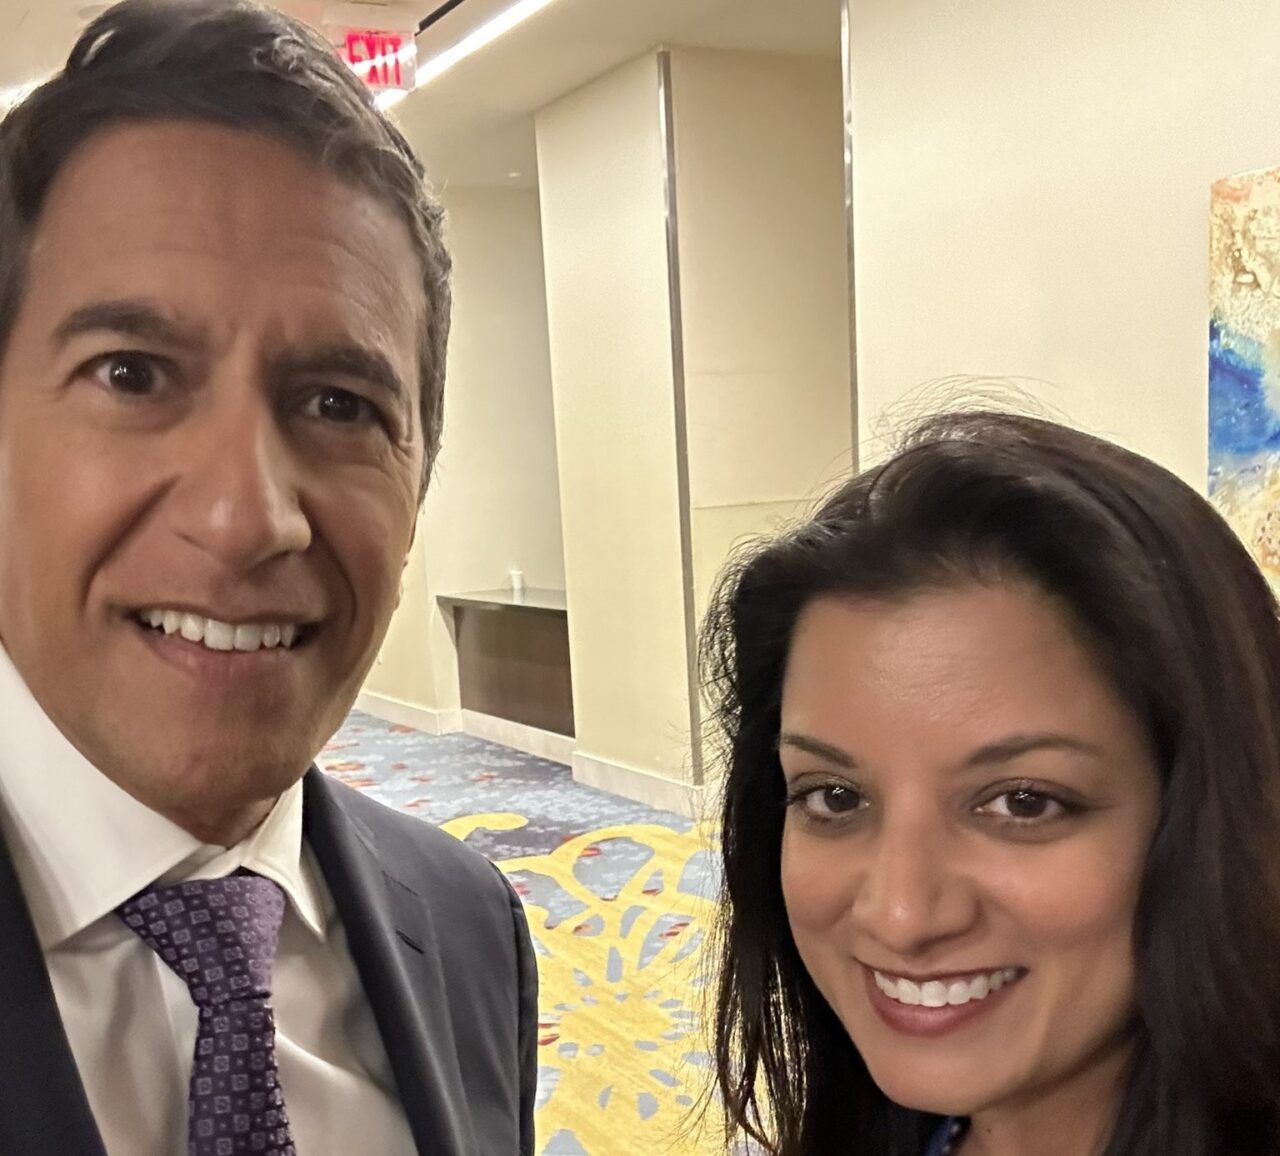 Shikha Jain: Honored to have met Sanjay Gupta, whose tales remind us why we fight for change